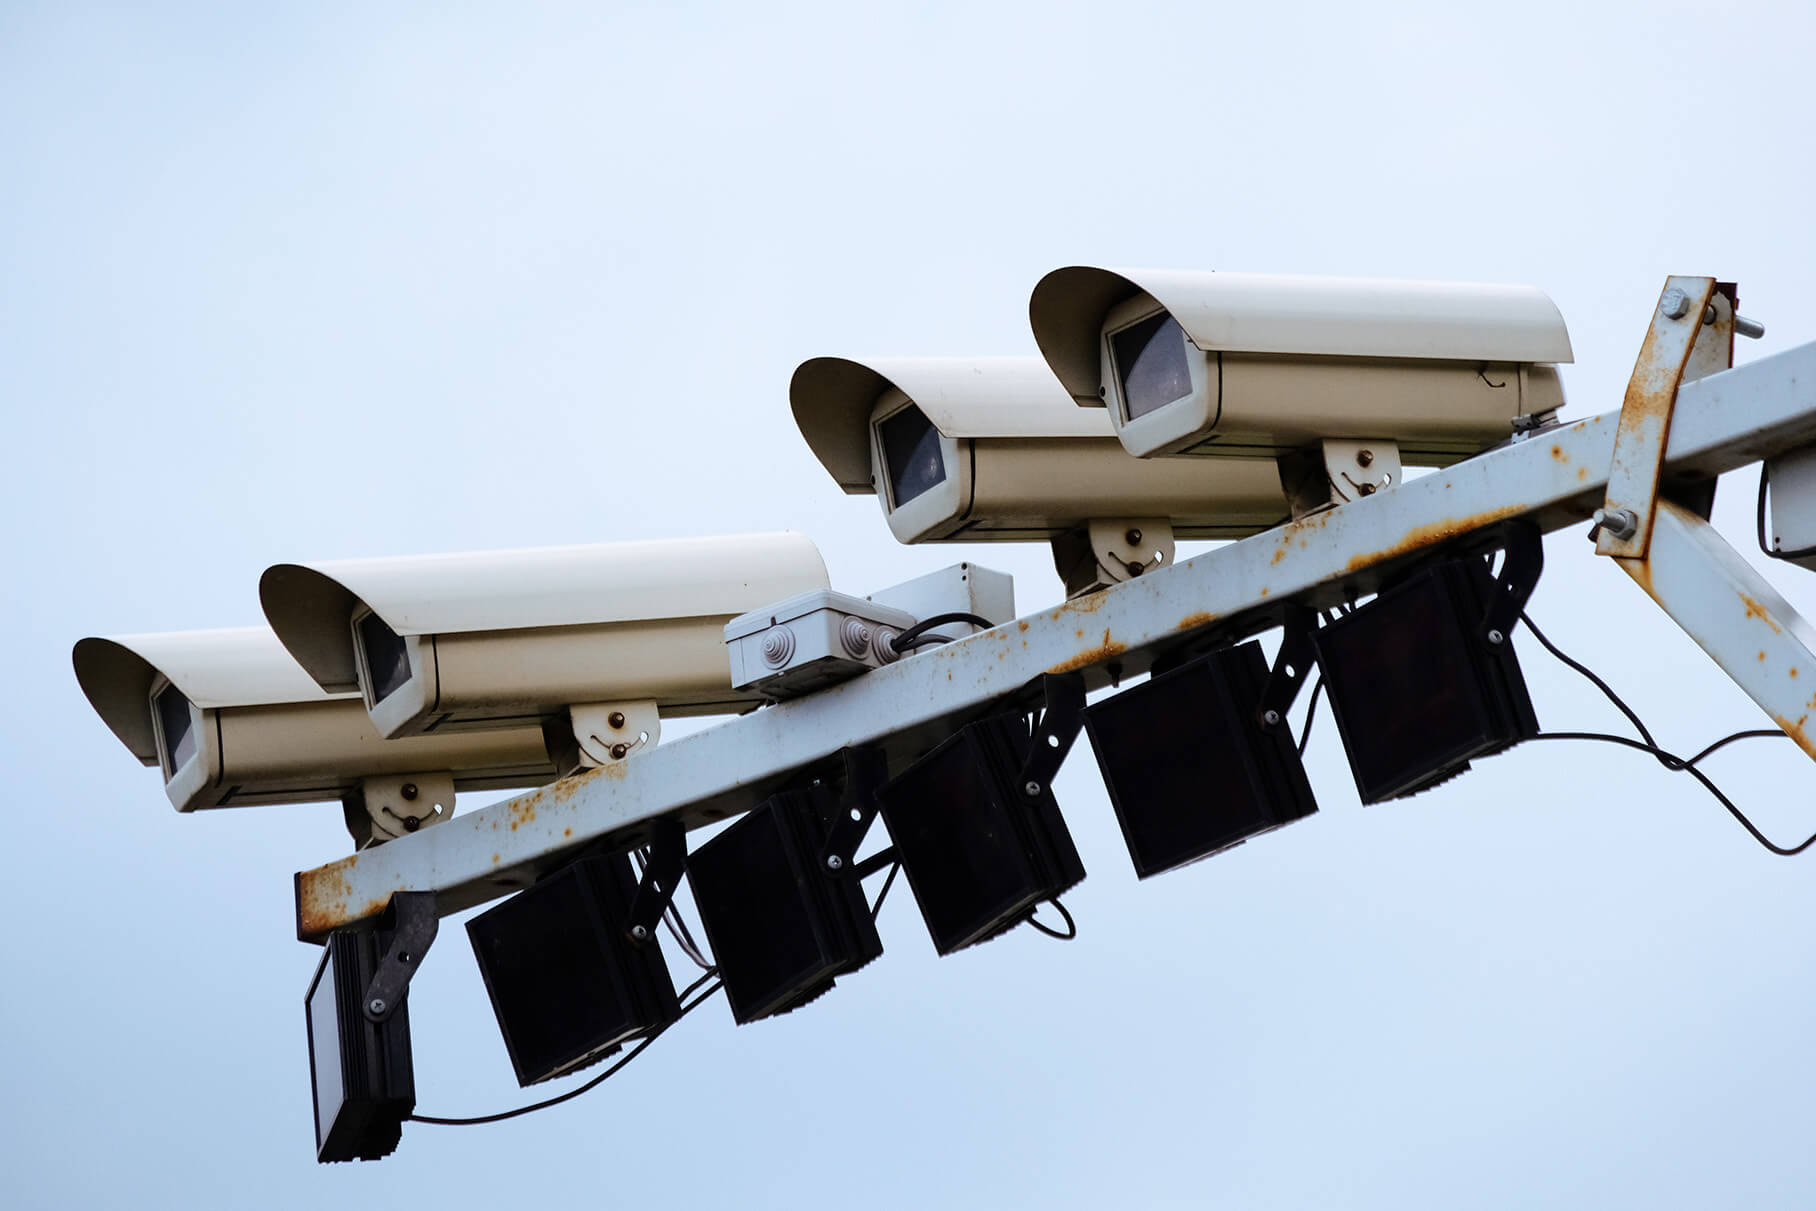 Russian authorities began to purchase much more traffic cameras